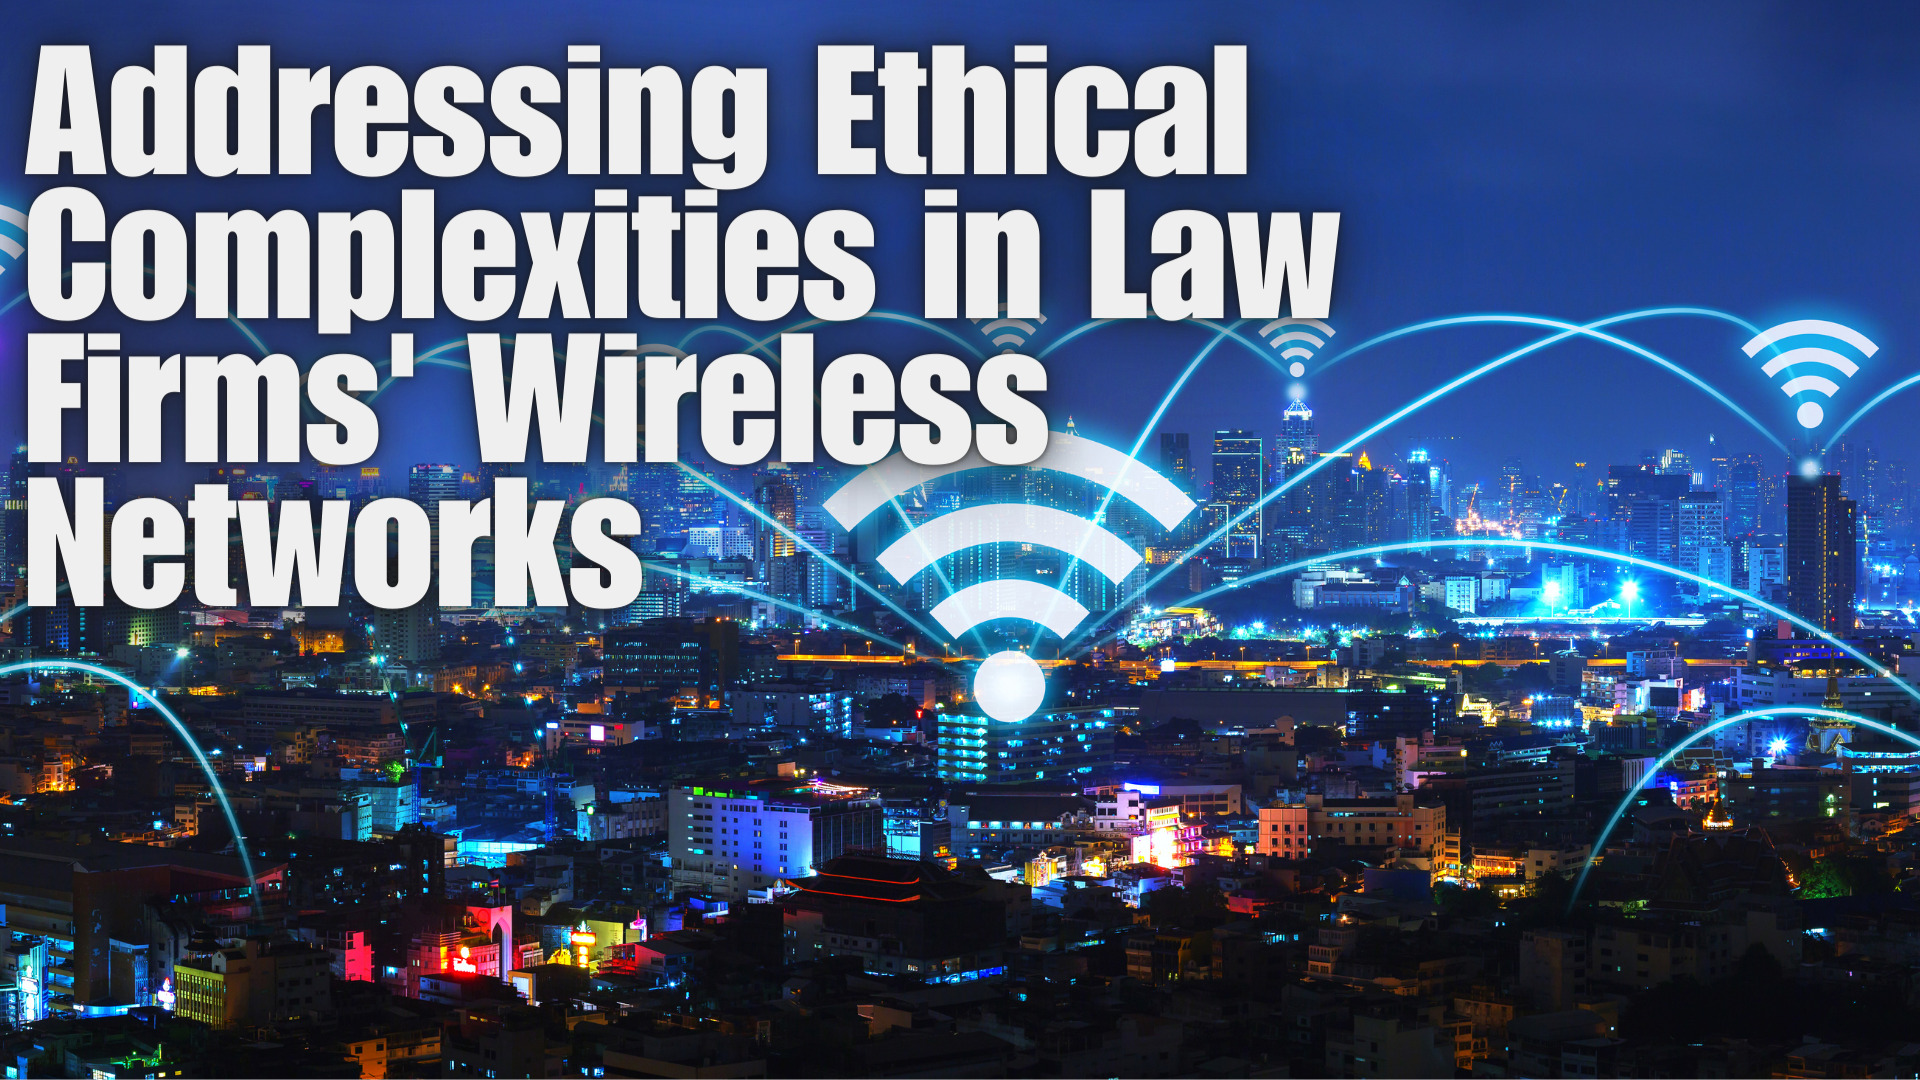 Addressing Ethical Complexities in Law Firms’ Wireless Networks